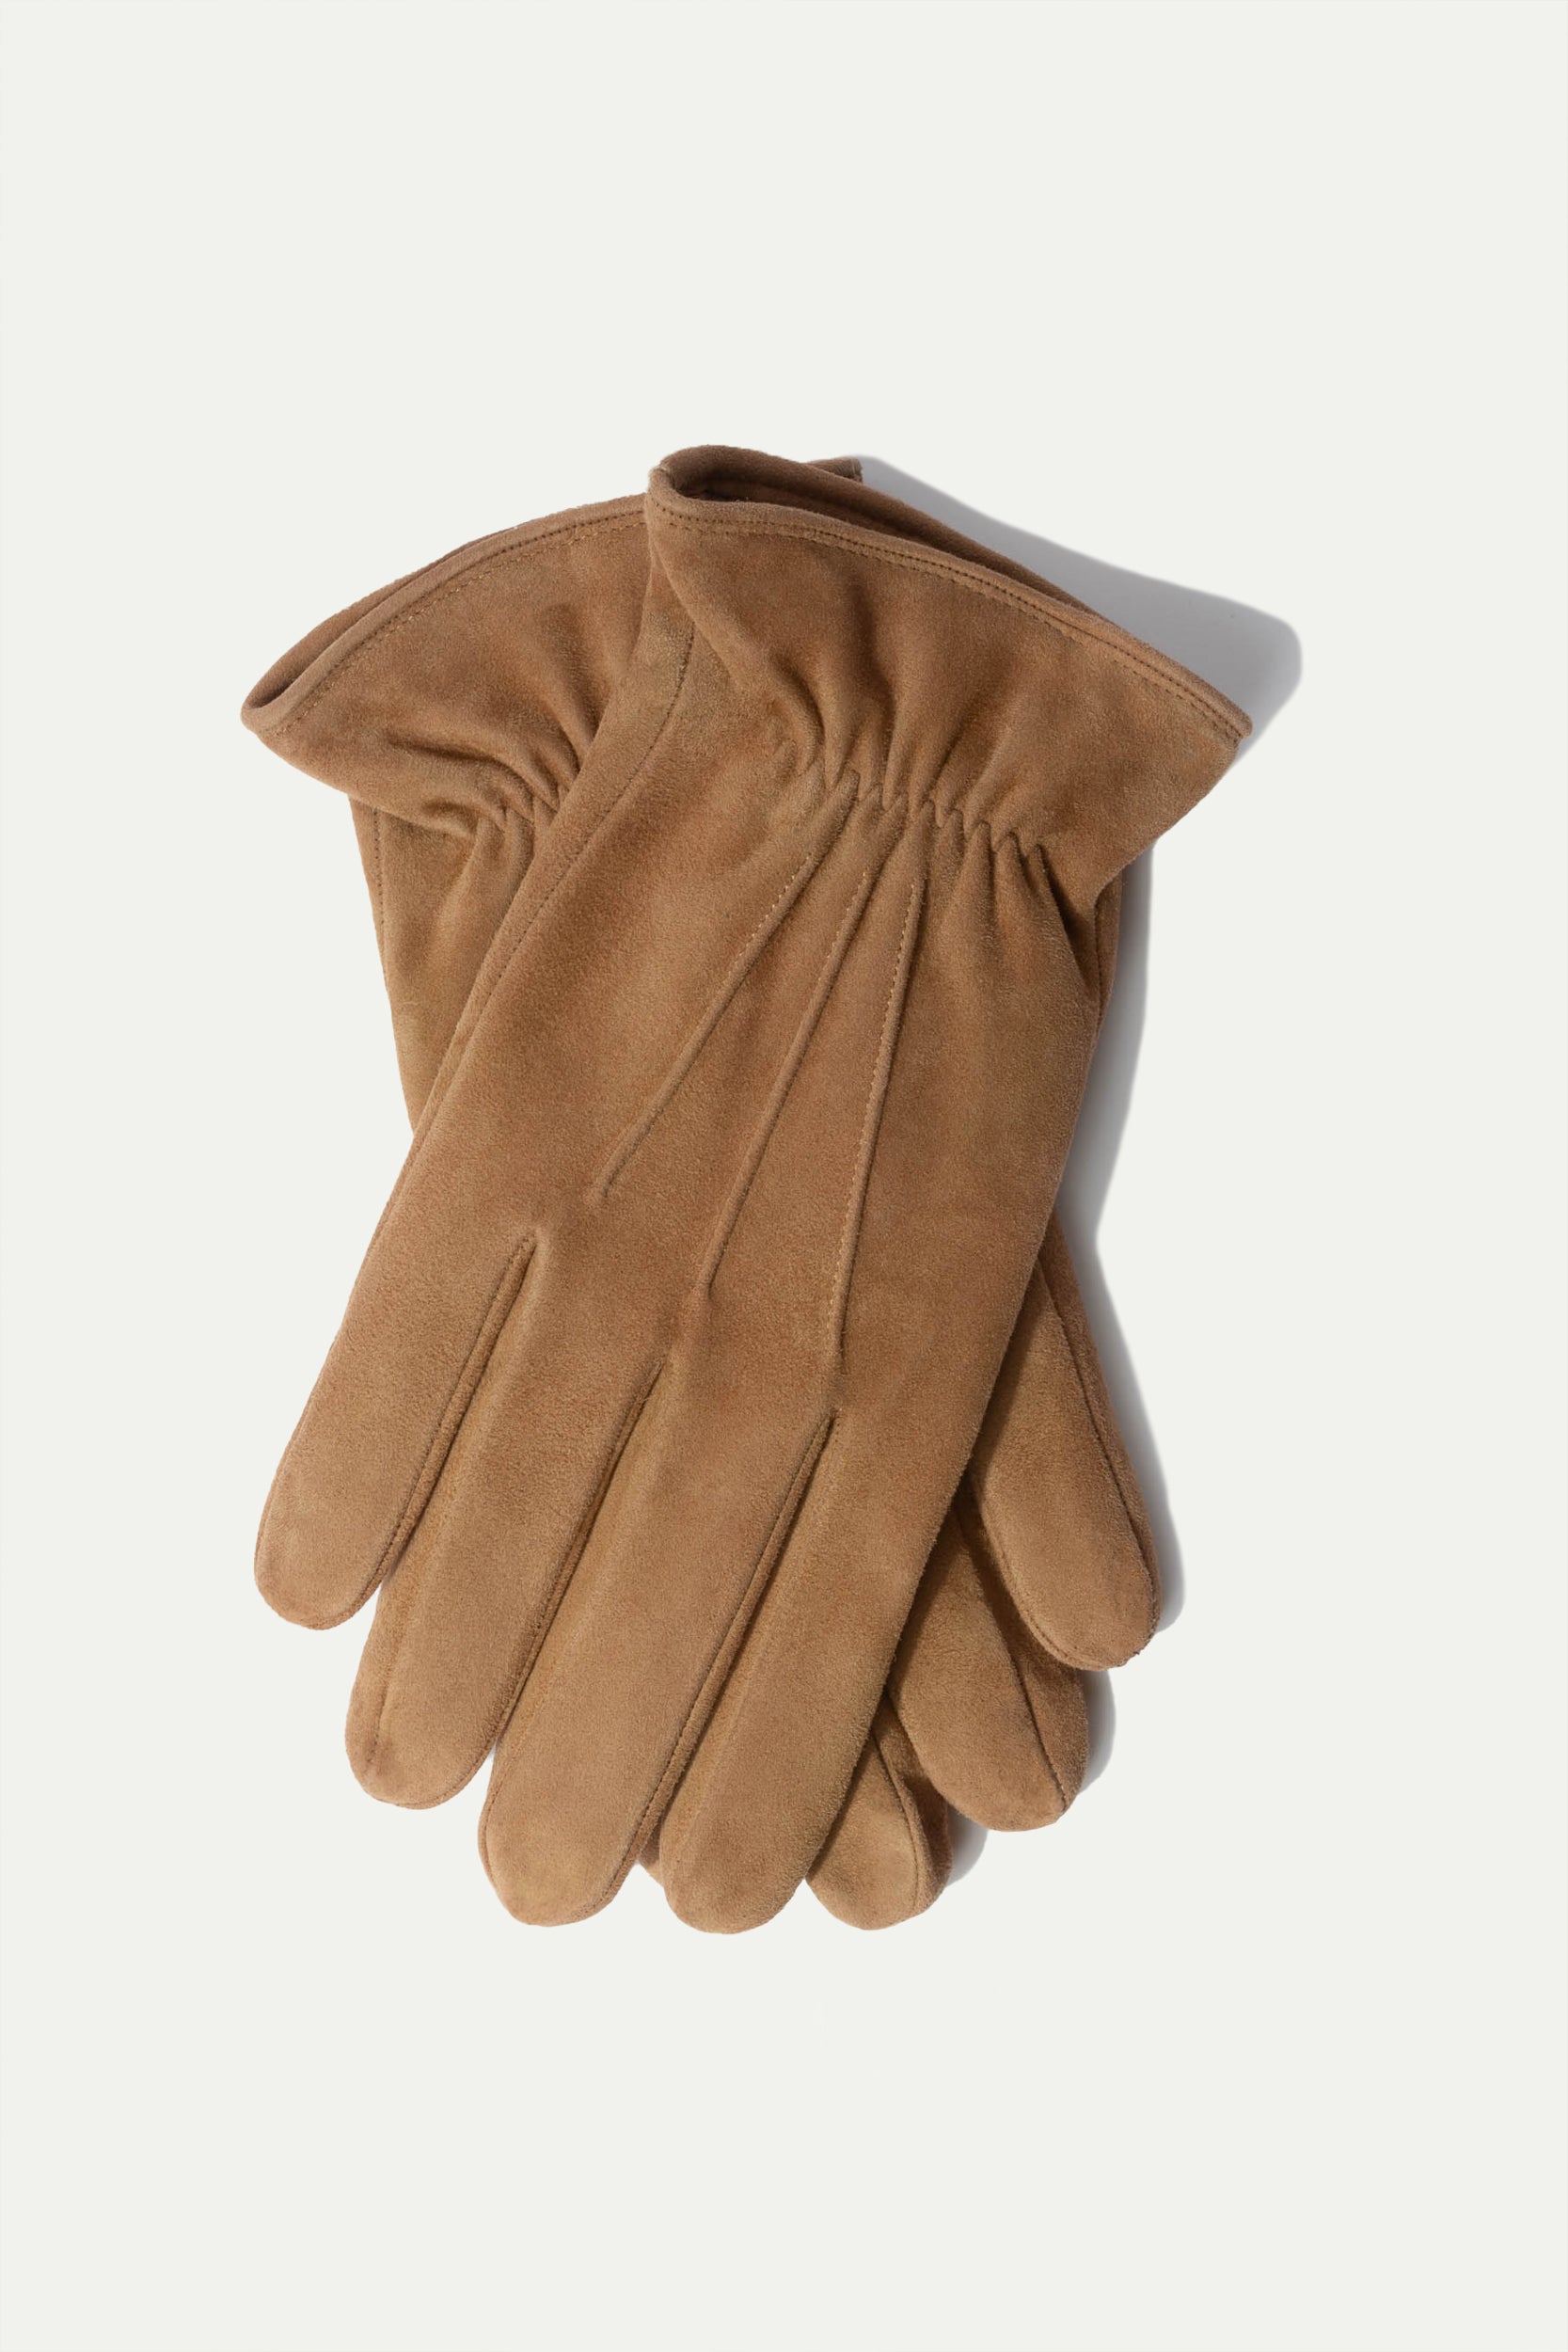 Avana Cashmere Lined Suede Gloves - Made in Italy